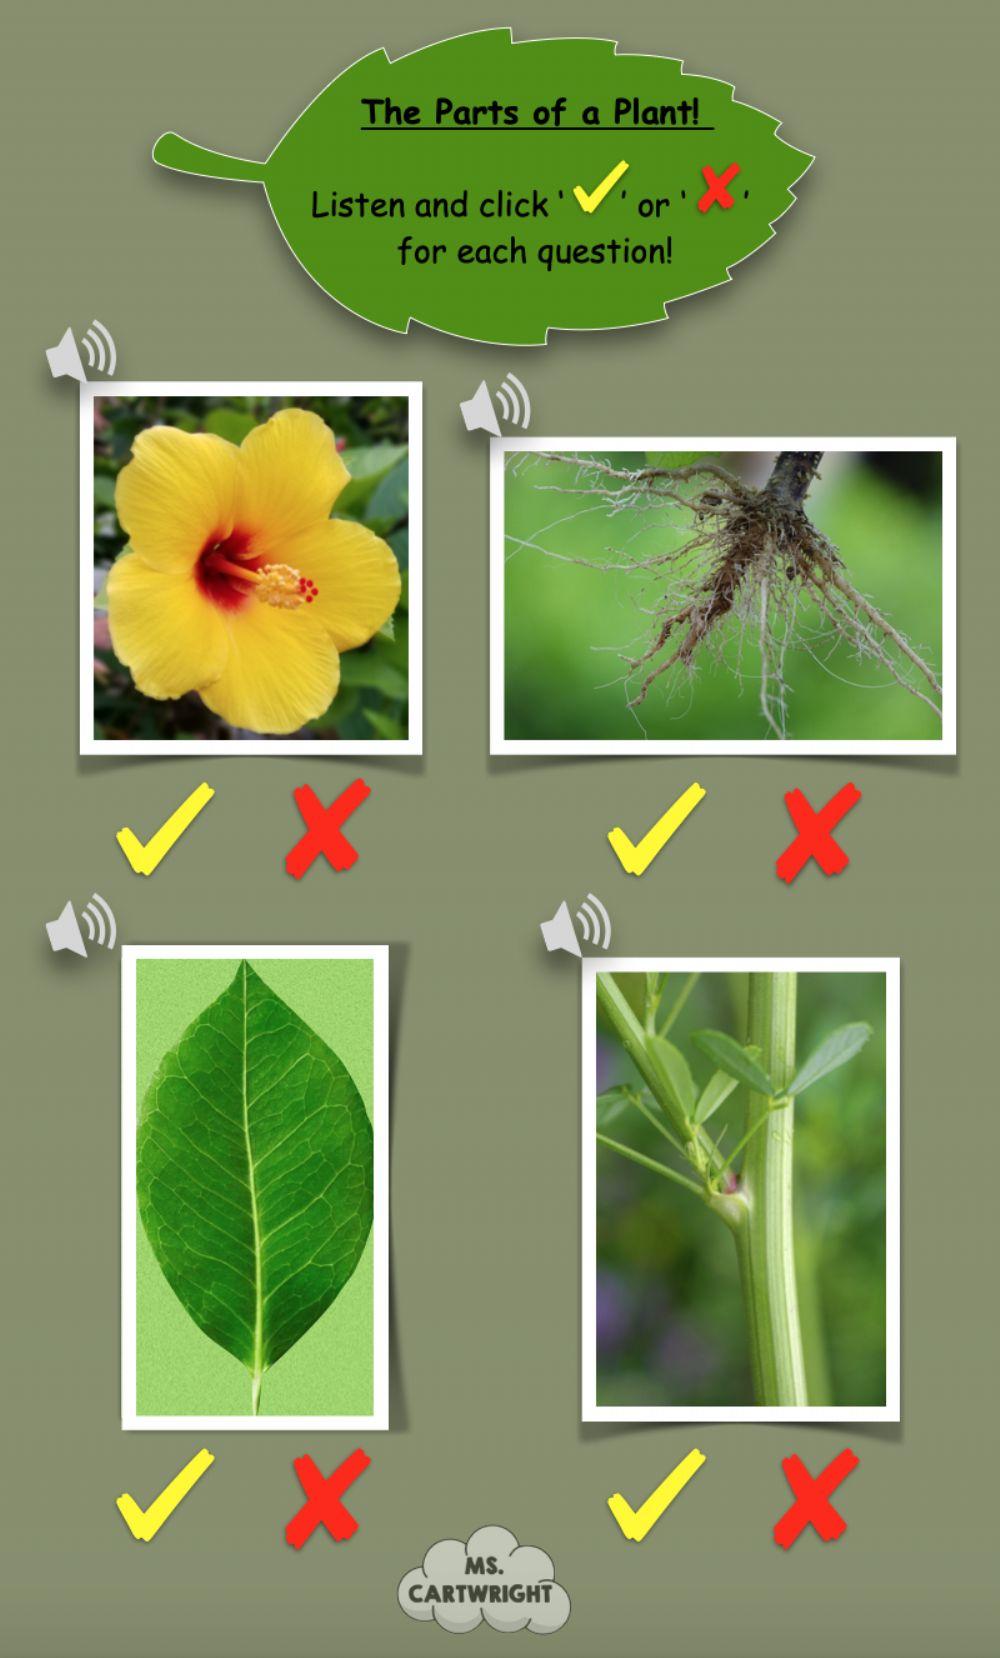 Parts of a plant